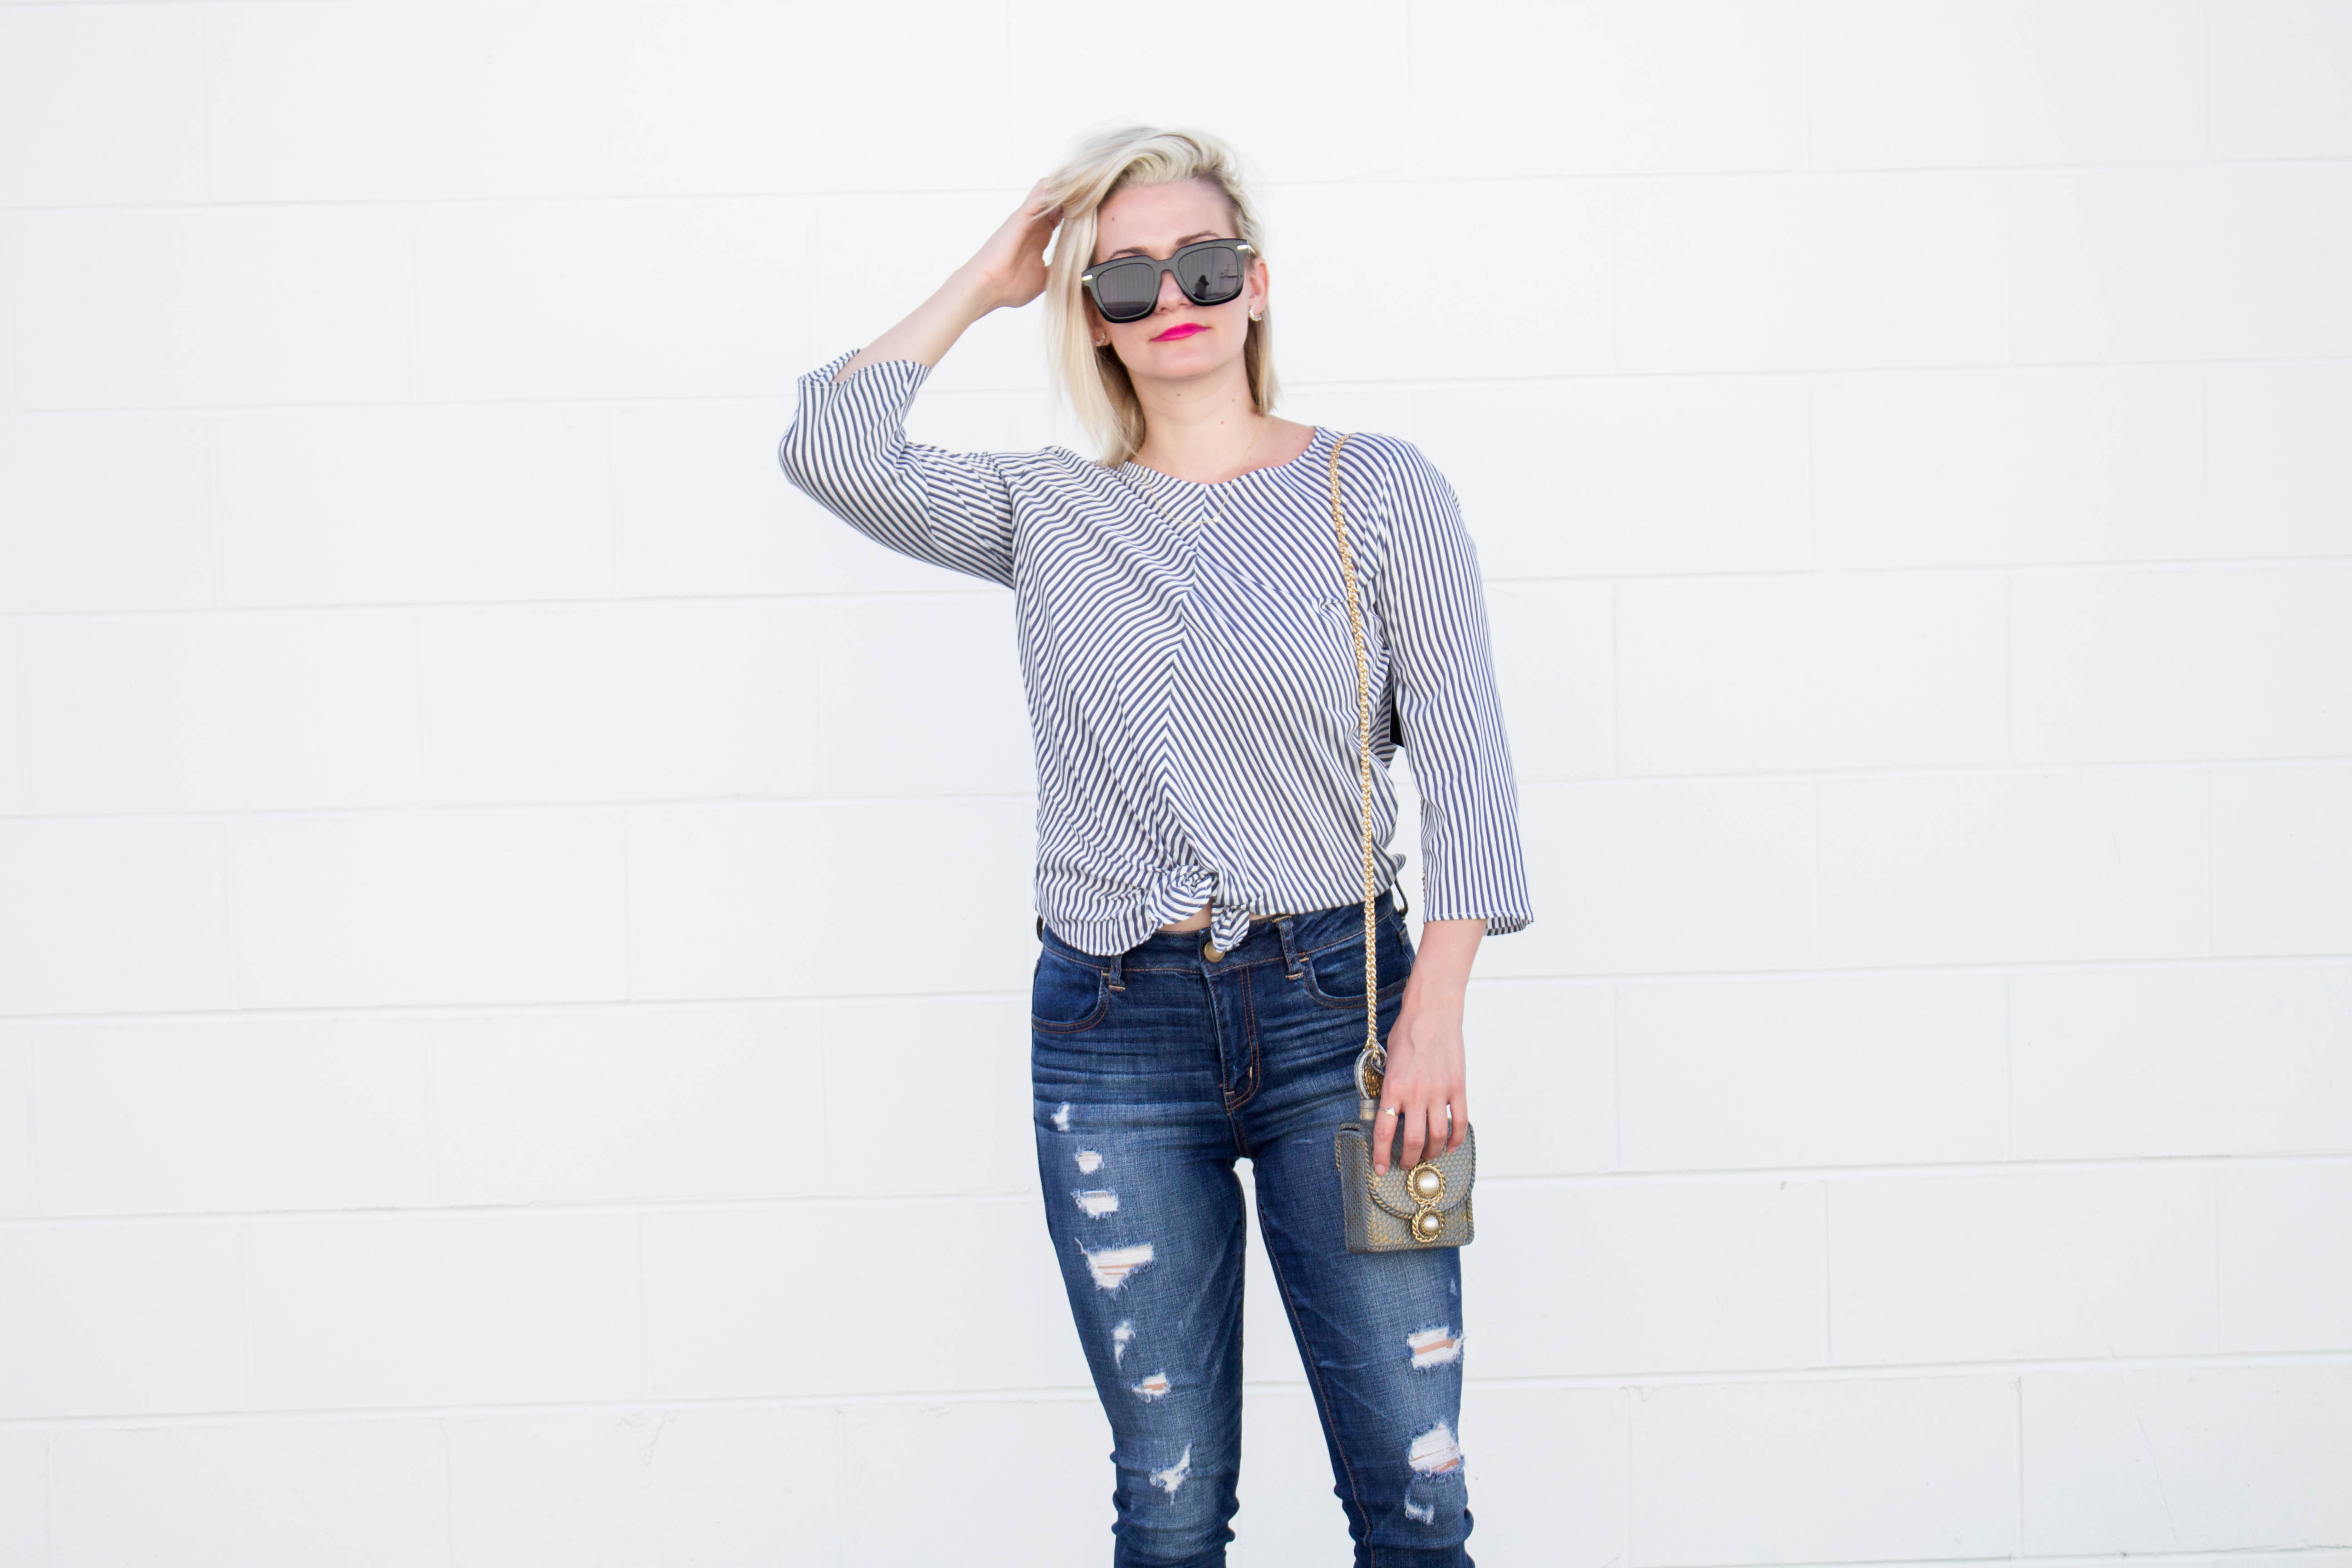 Grey_Top_Ripped_Denim_Jeans